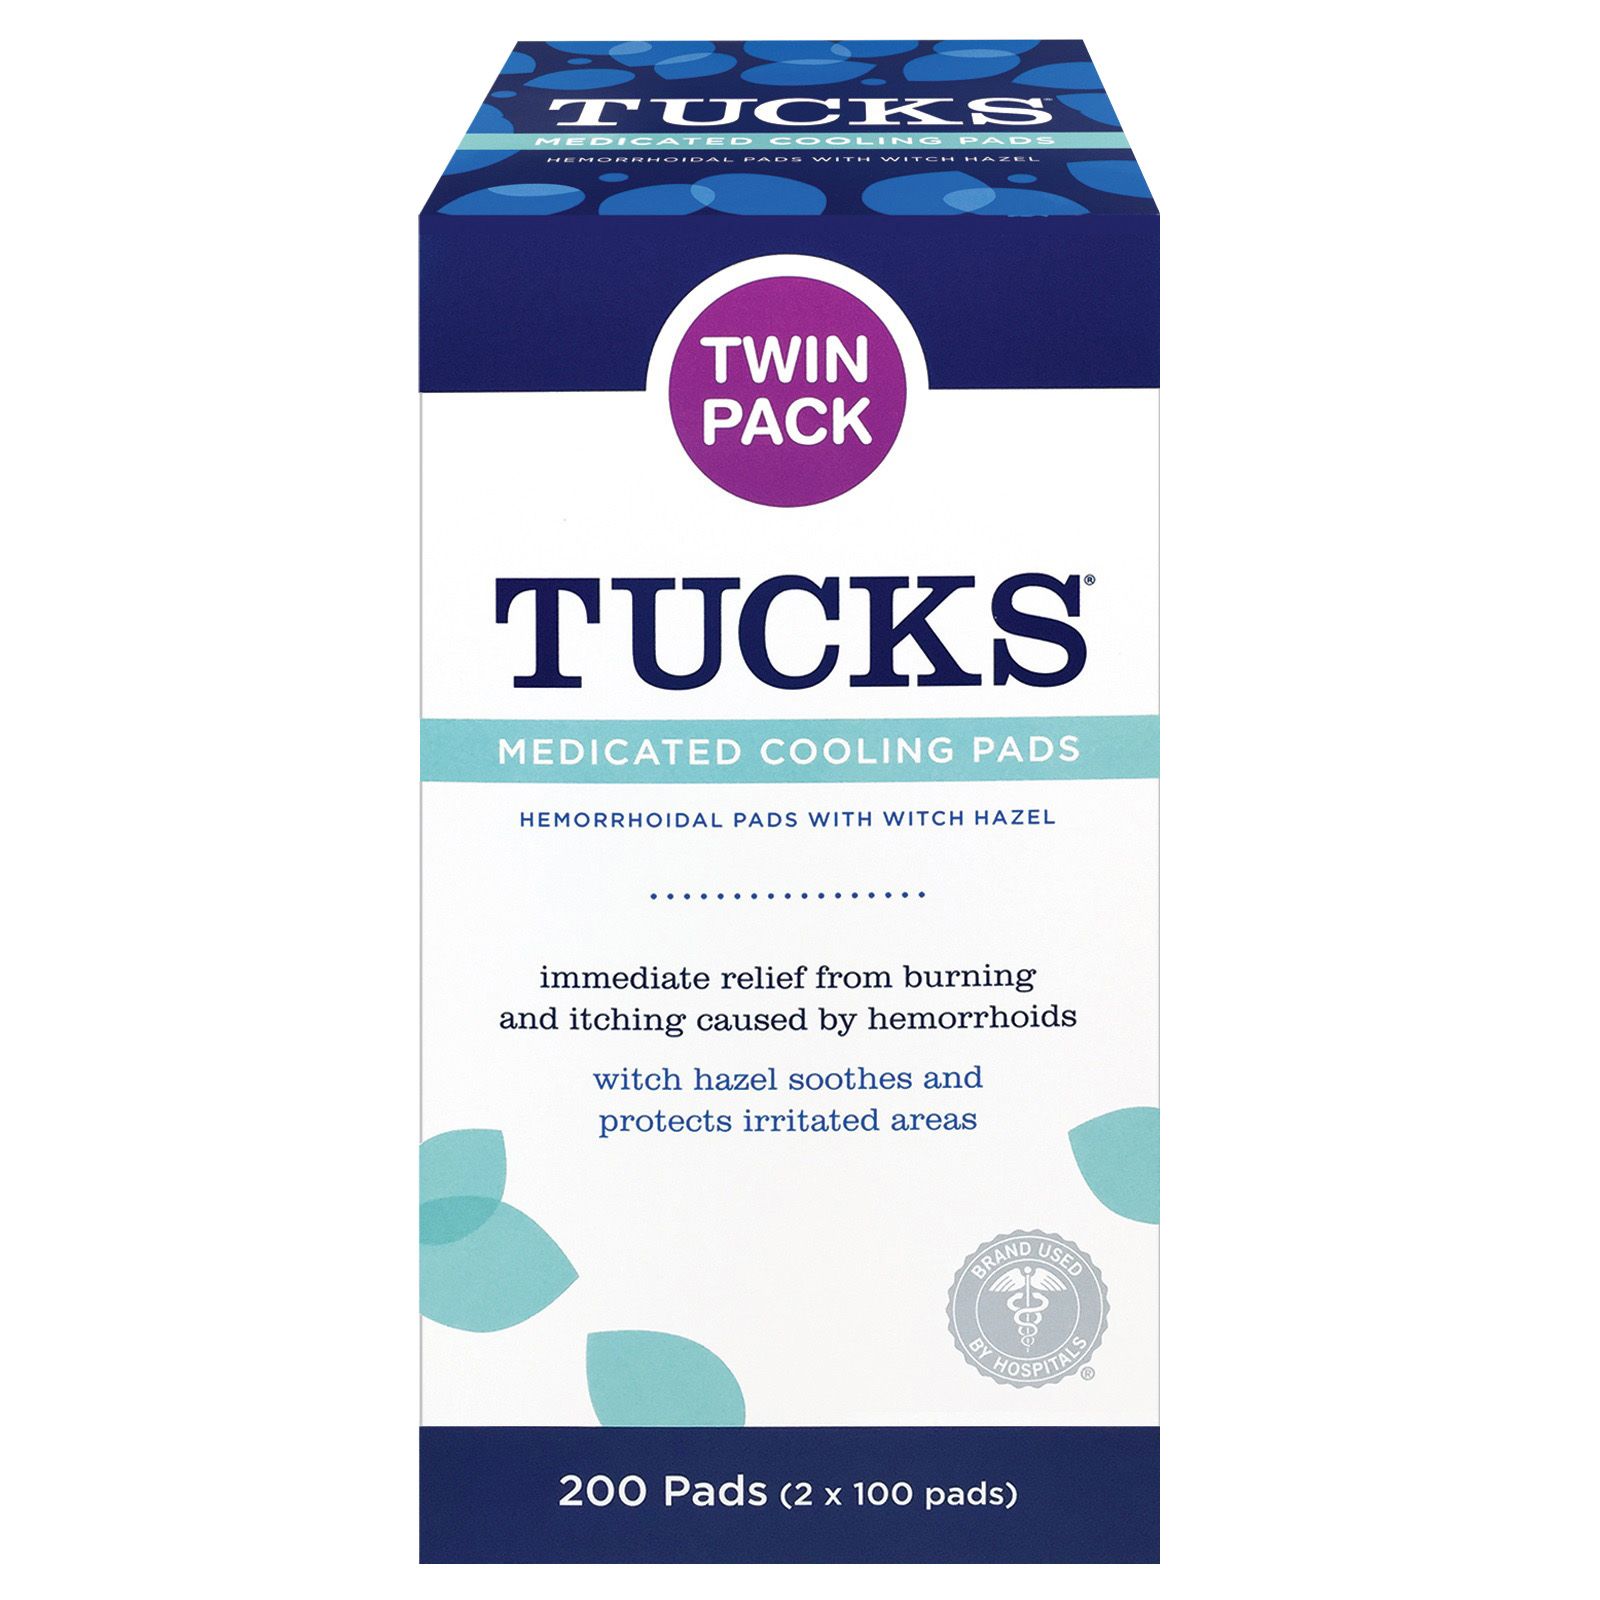 2 Tucks Cooling Pads Medicated 100 Count Exp 10/23 312547150200